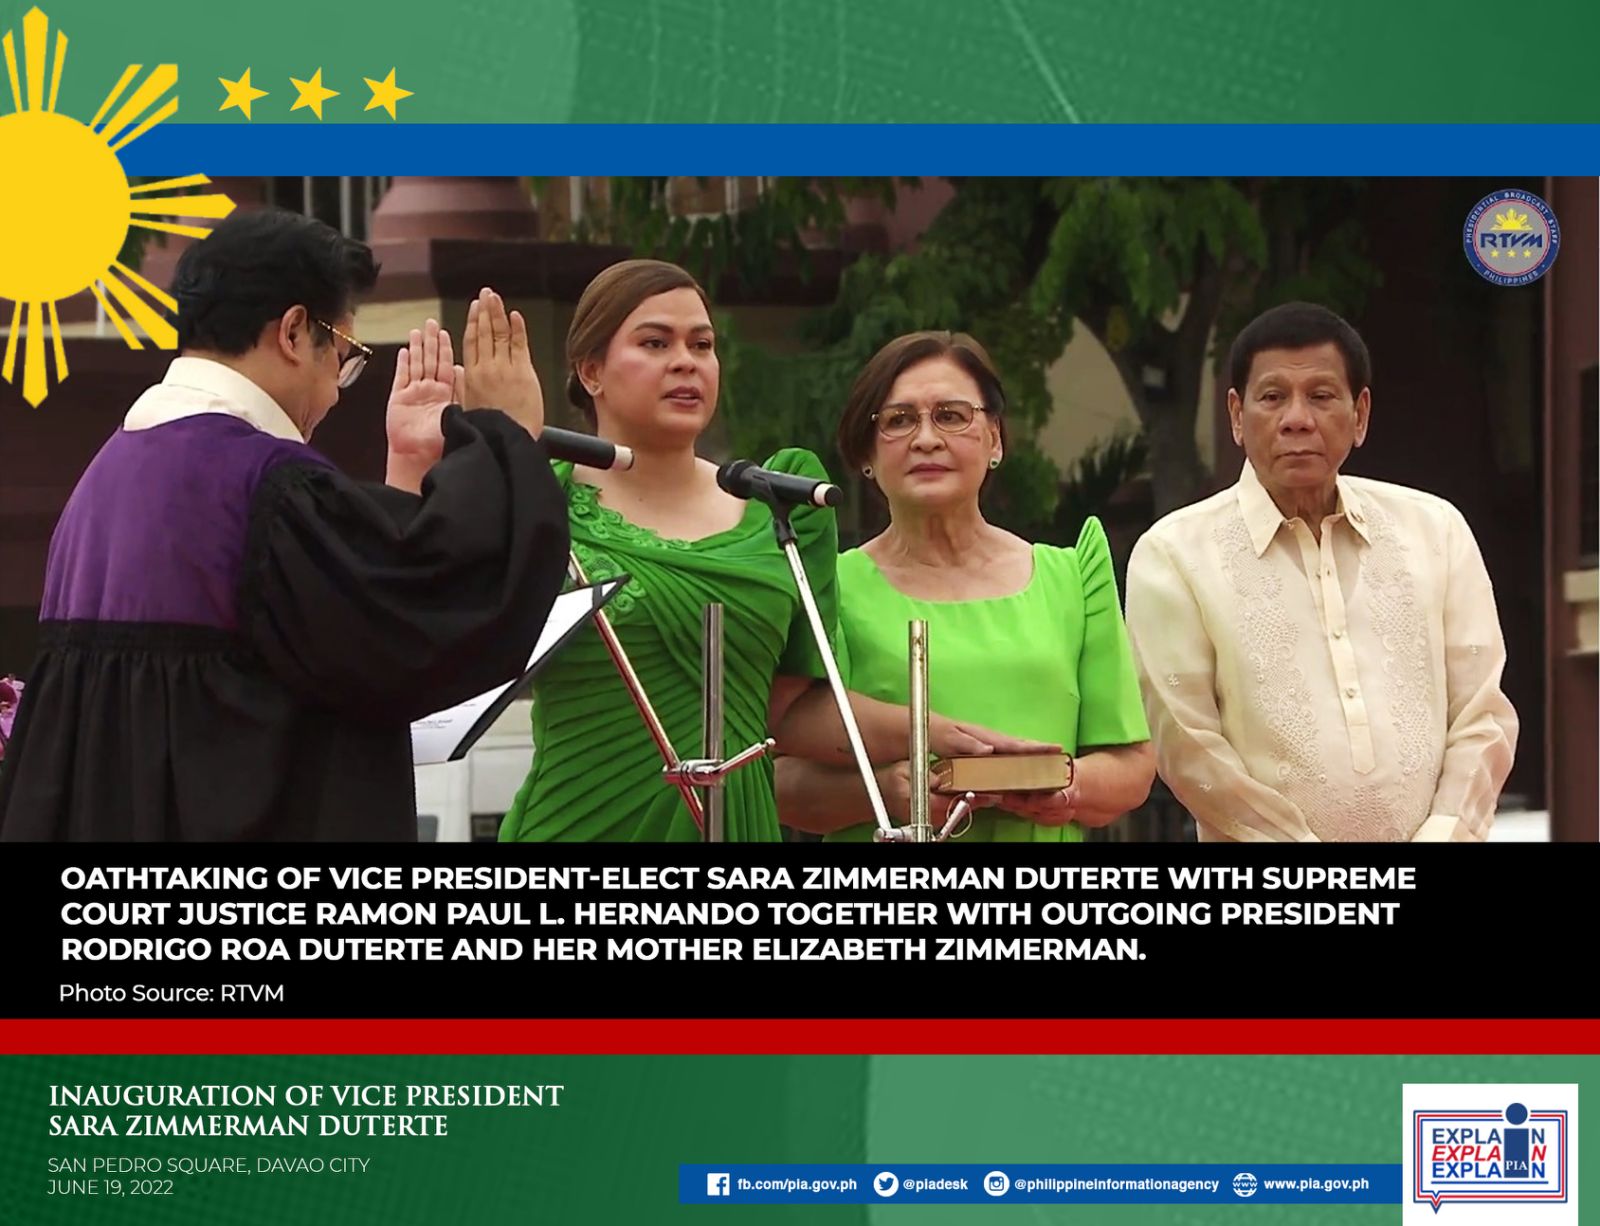 Inauguration of VP-elect Sara Zimmerman Duterte as the 15th Vice President of the Philippines